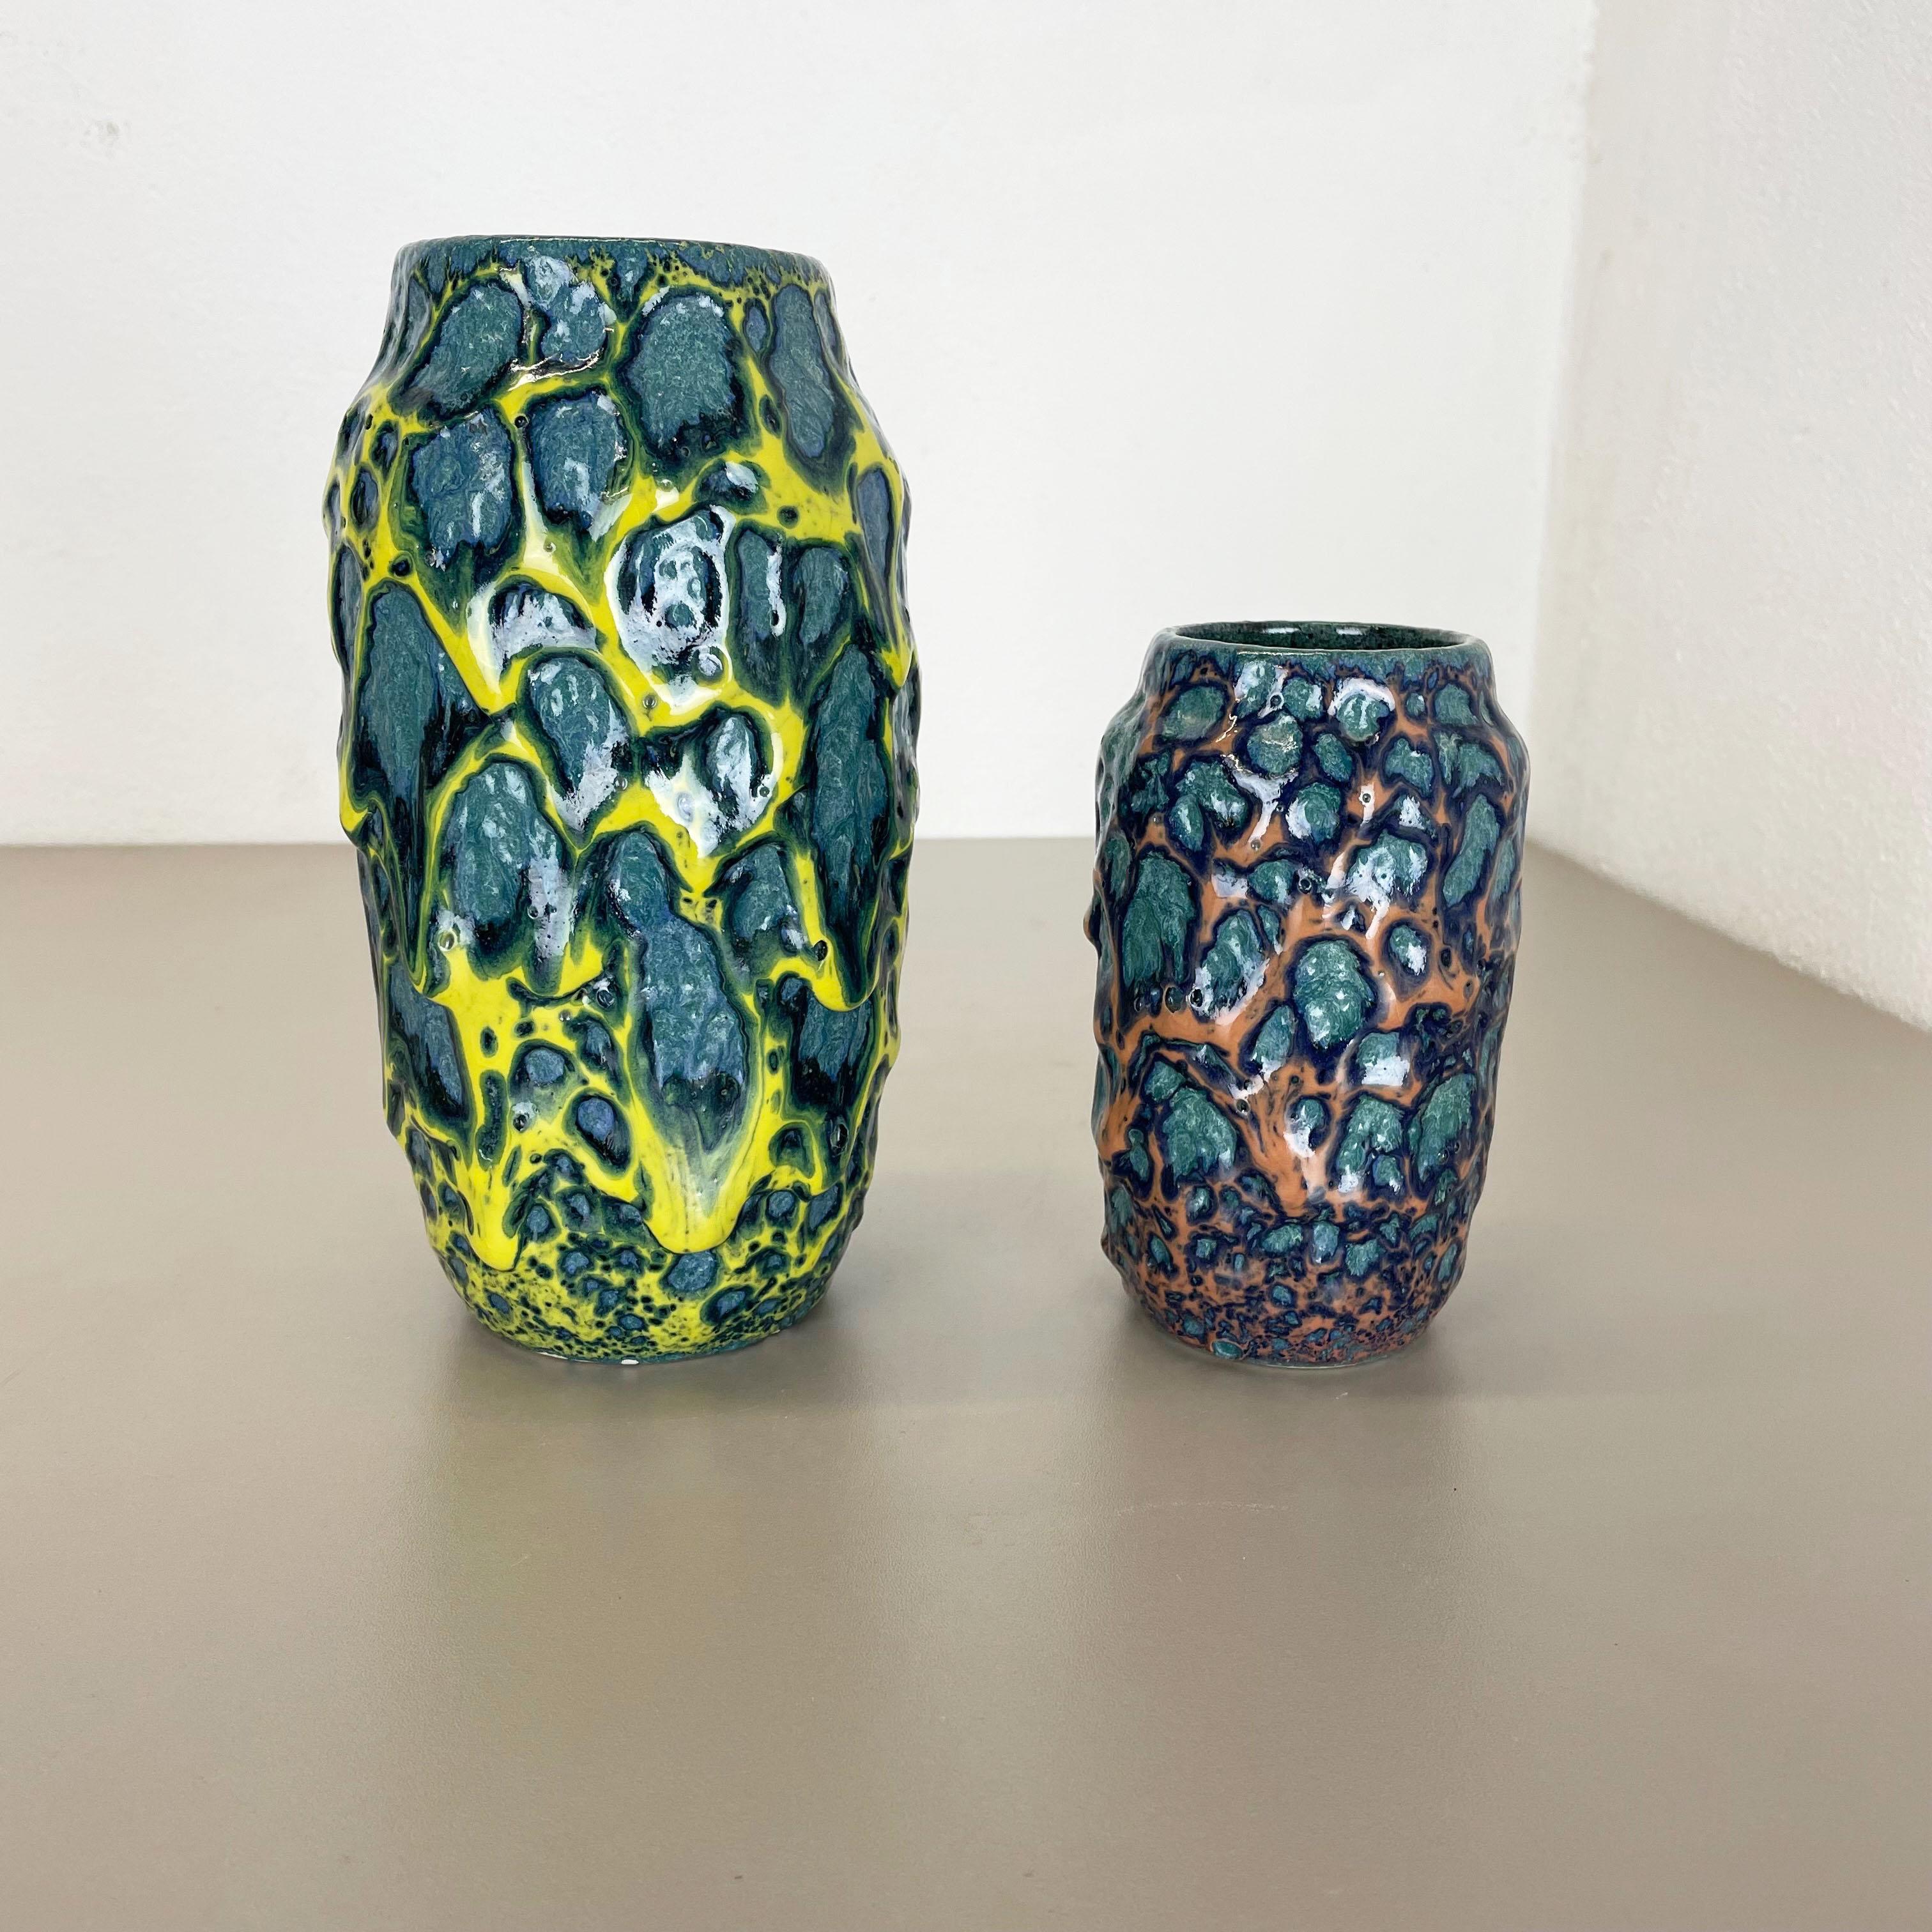 Article:

Fat lava art vase, heavy Brutalist glaze  set of 2


Producer:

Scheurich, Germany



Decade:

1970s




This original vintage vase set was produced in the 1970s in Germany. It is made of ceramic pottery in fat lava optic with abstract